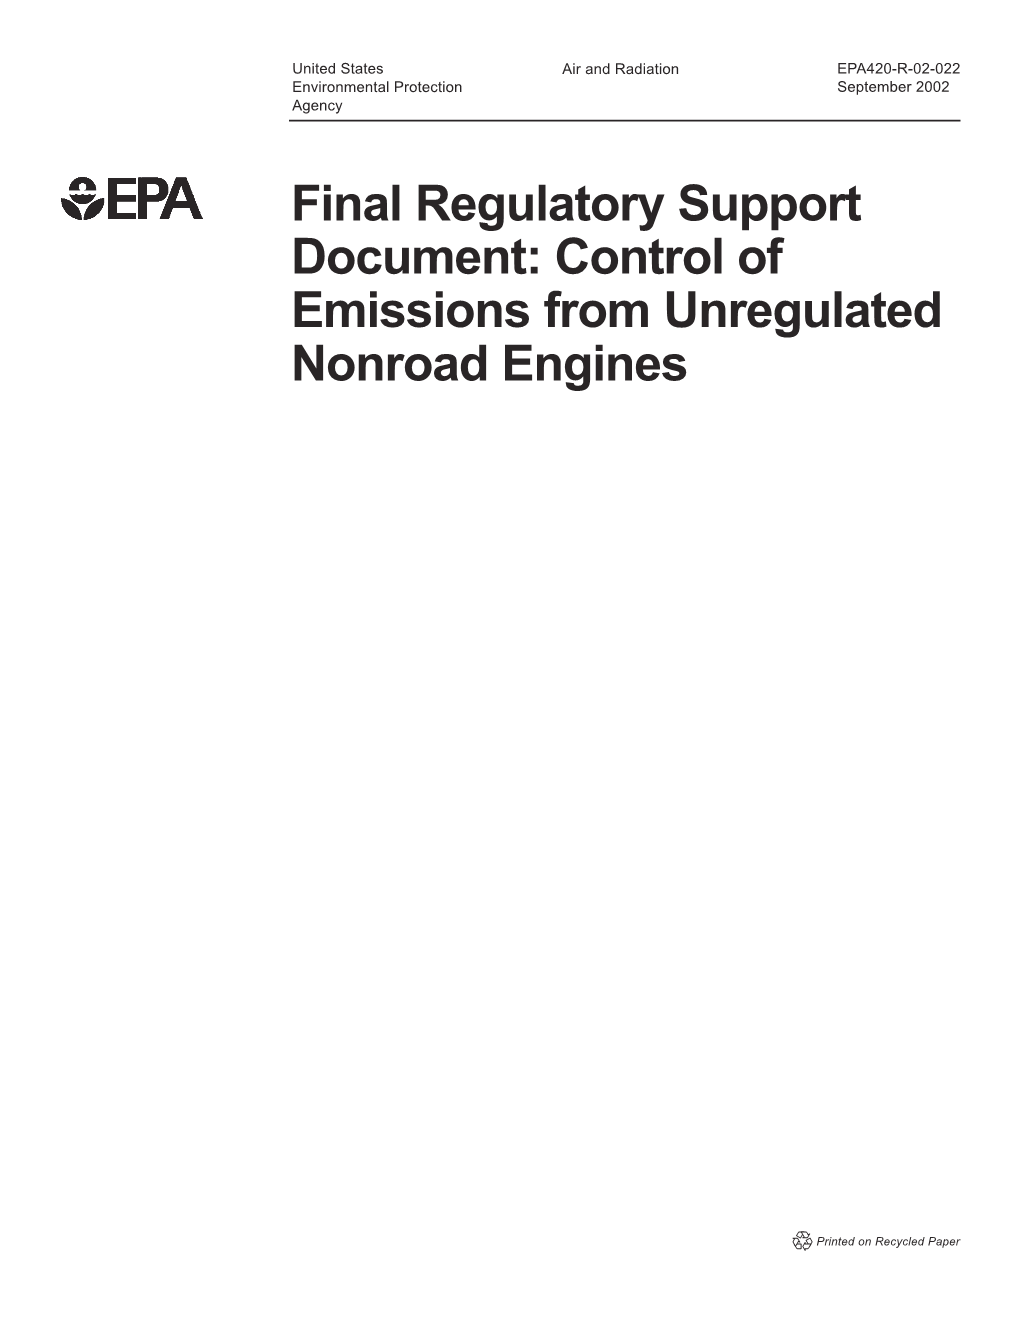 Control of Emissions from Unregulated Nonroad Engines